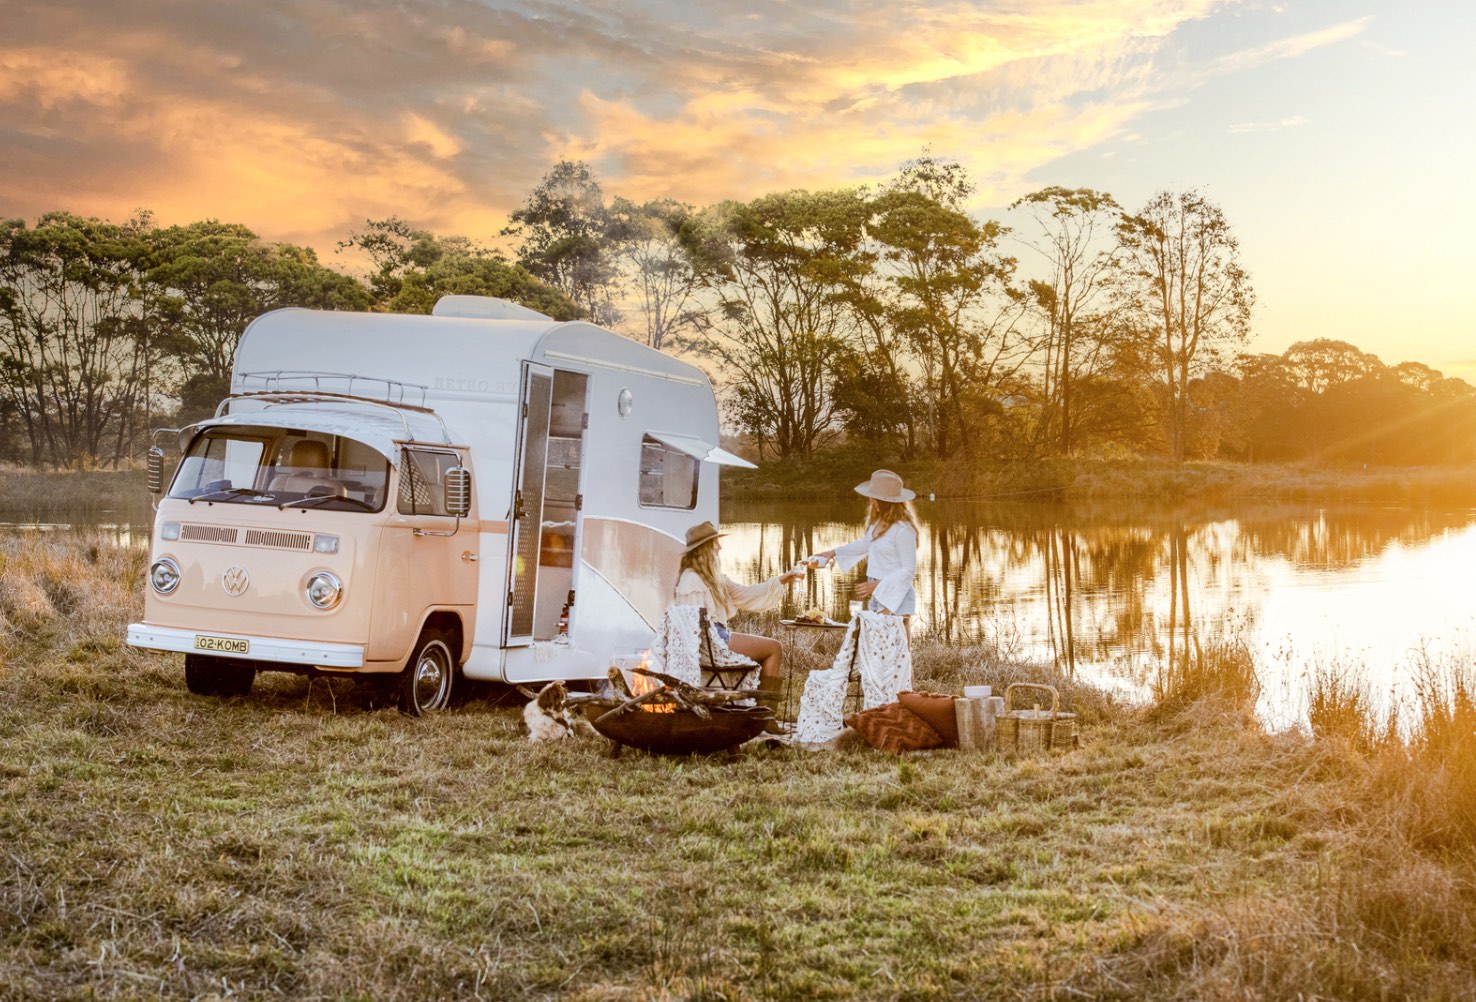 Glam up Your End-of-Year Holiday With a Sexy Caravan